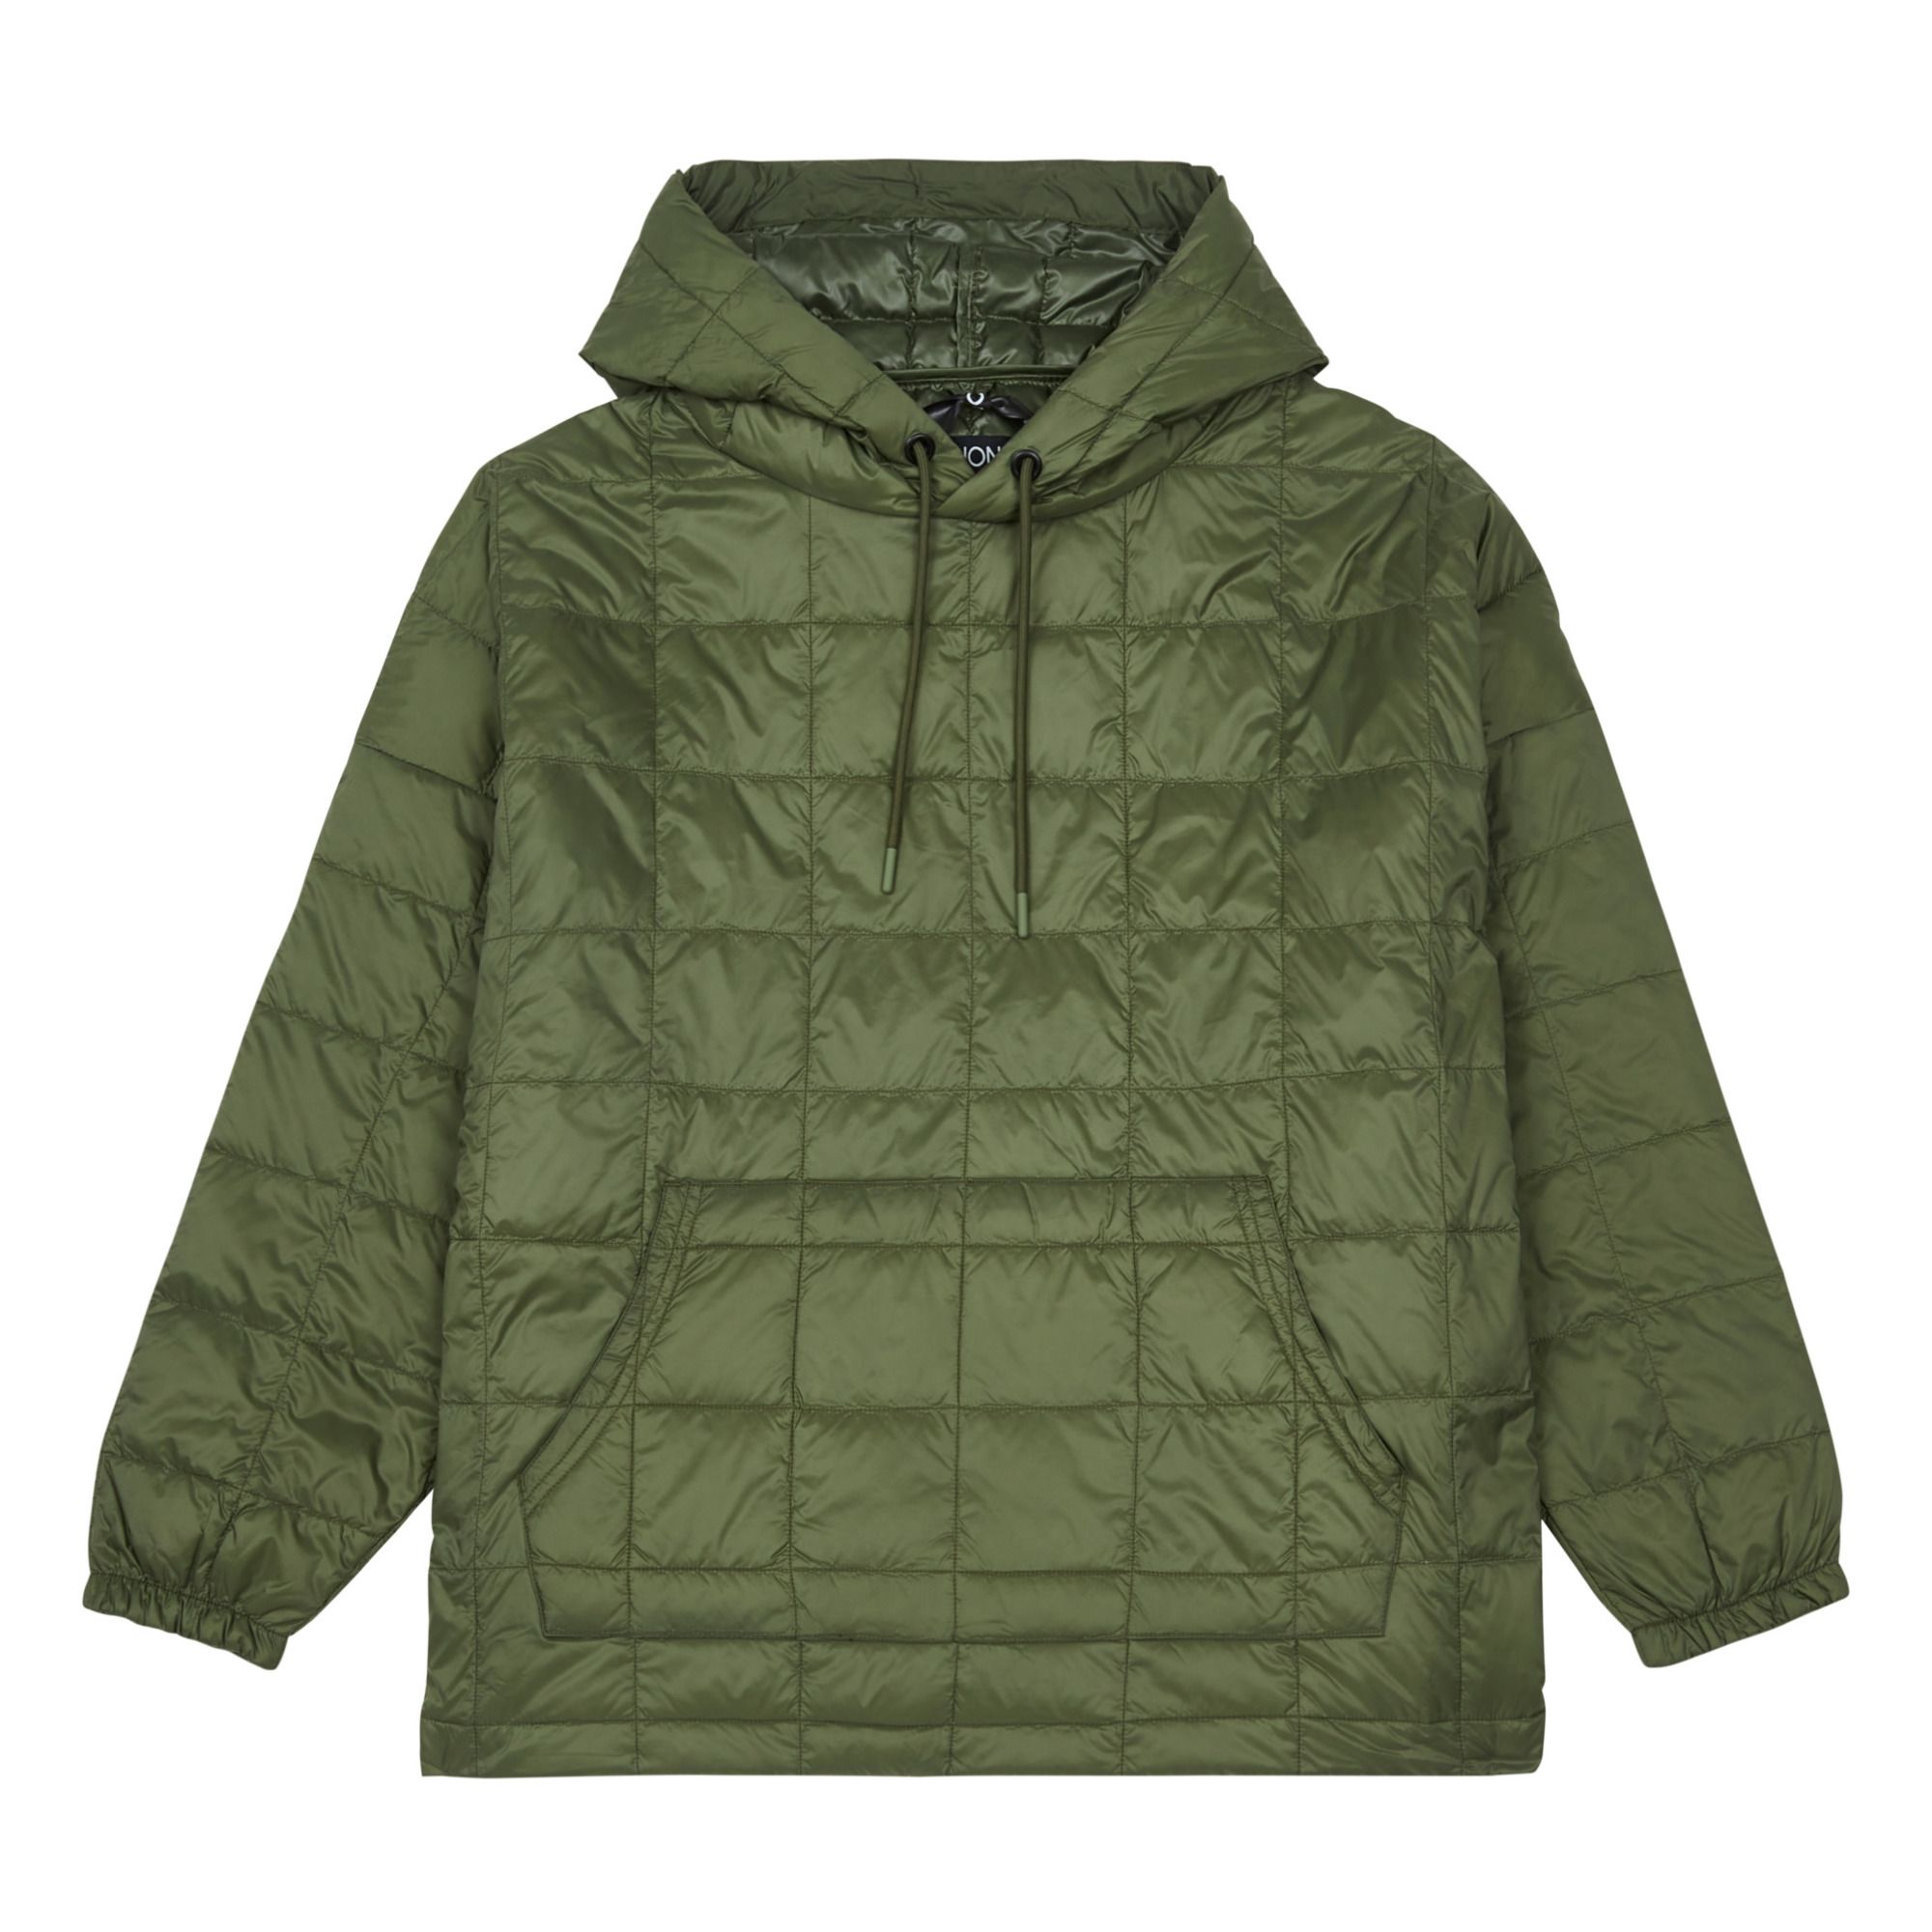 Taion - Parka - Collection Adulte - - Femme - Vert olive